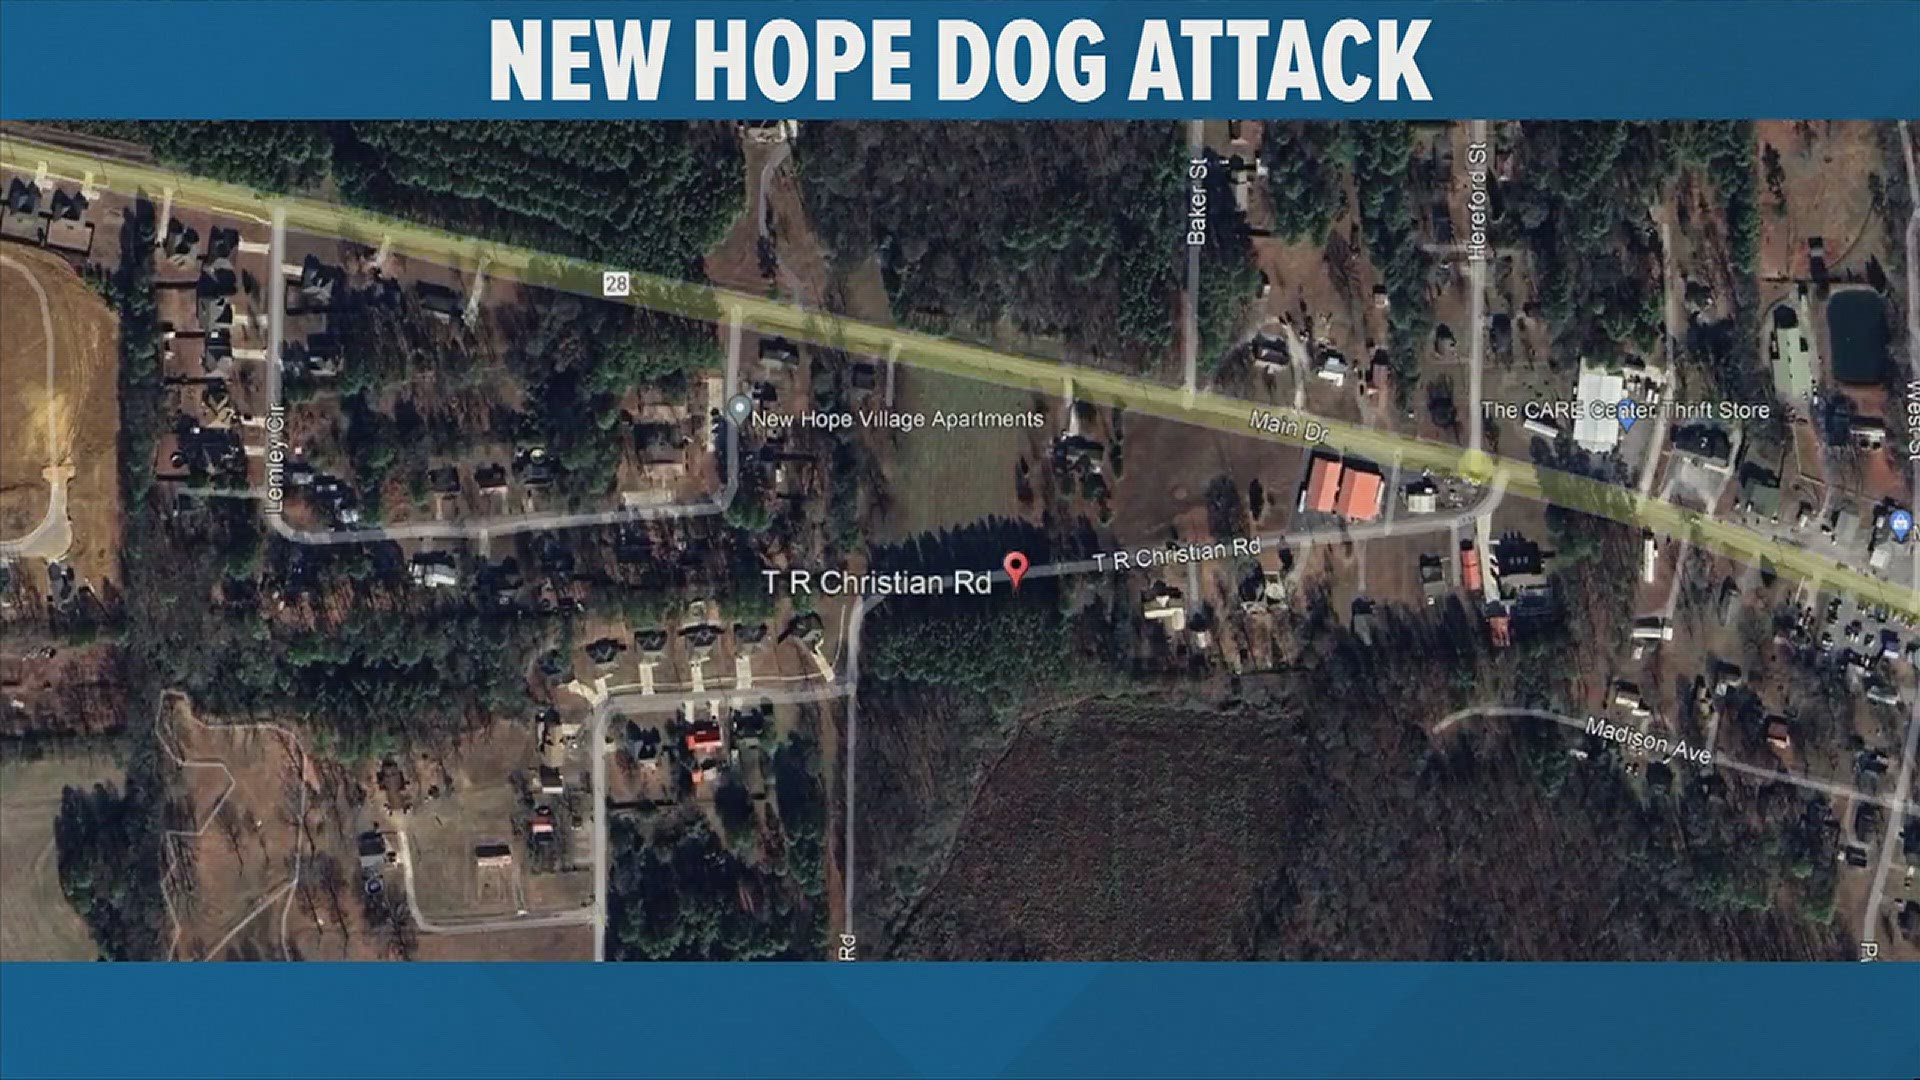 HEMSI confirms the dog attack happened at TR Christian Road, they say the call came in before 5:30 Friday evening. Unfortunately, the child was dead on scene.